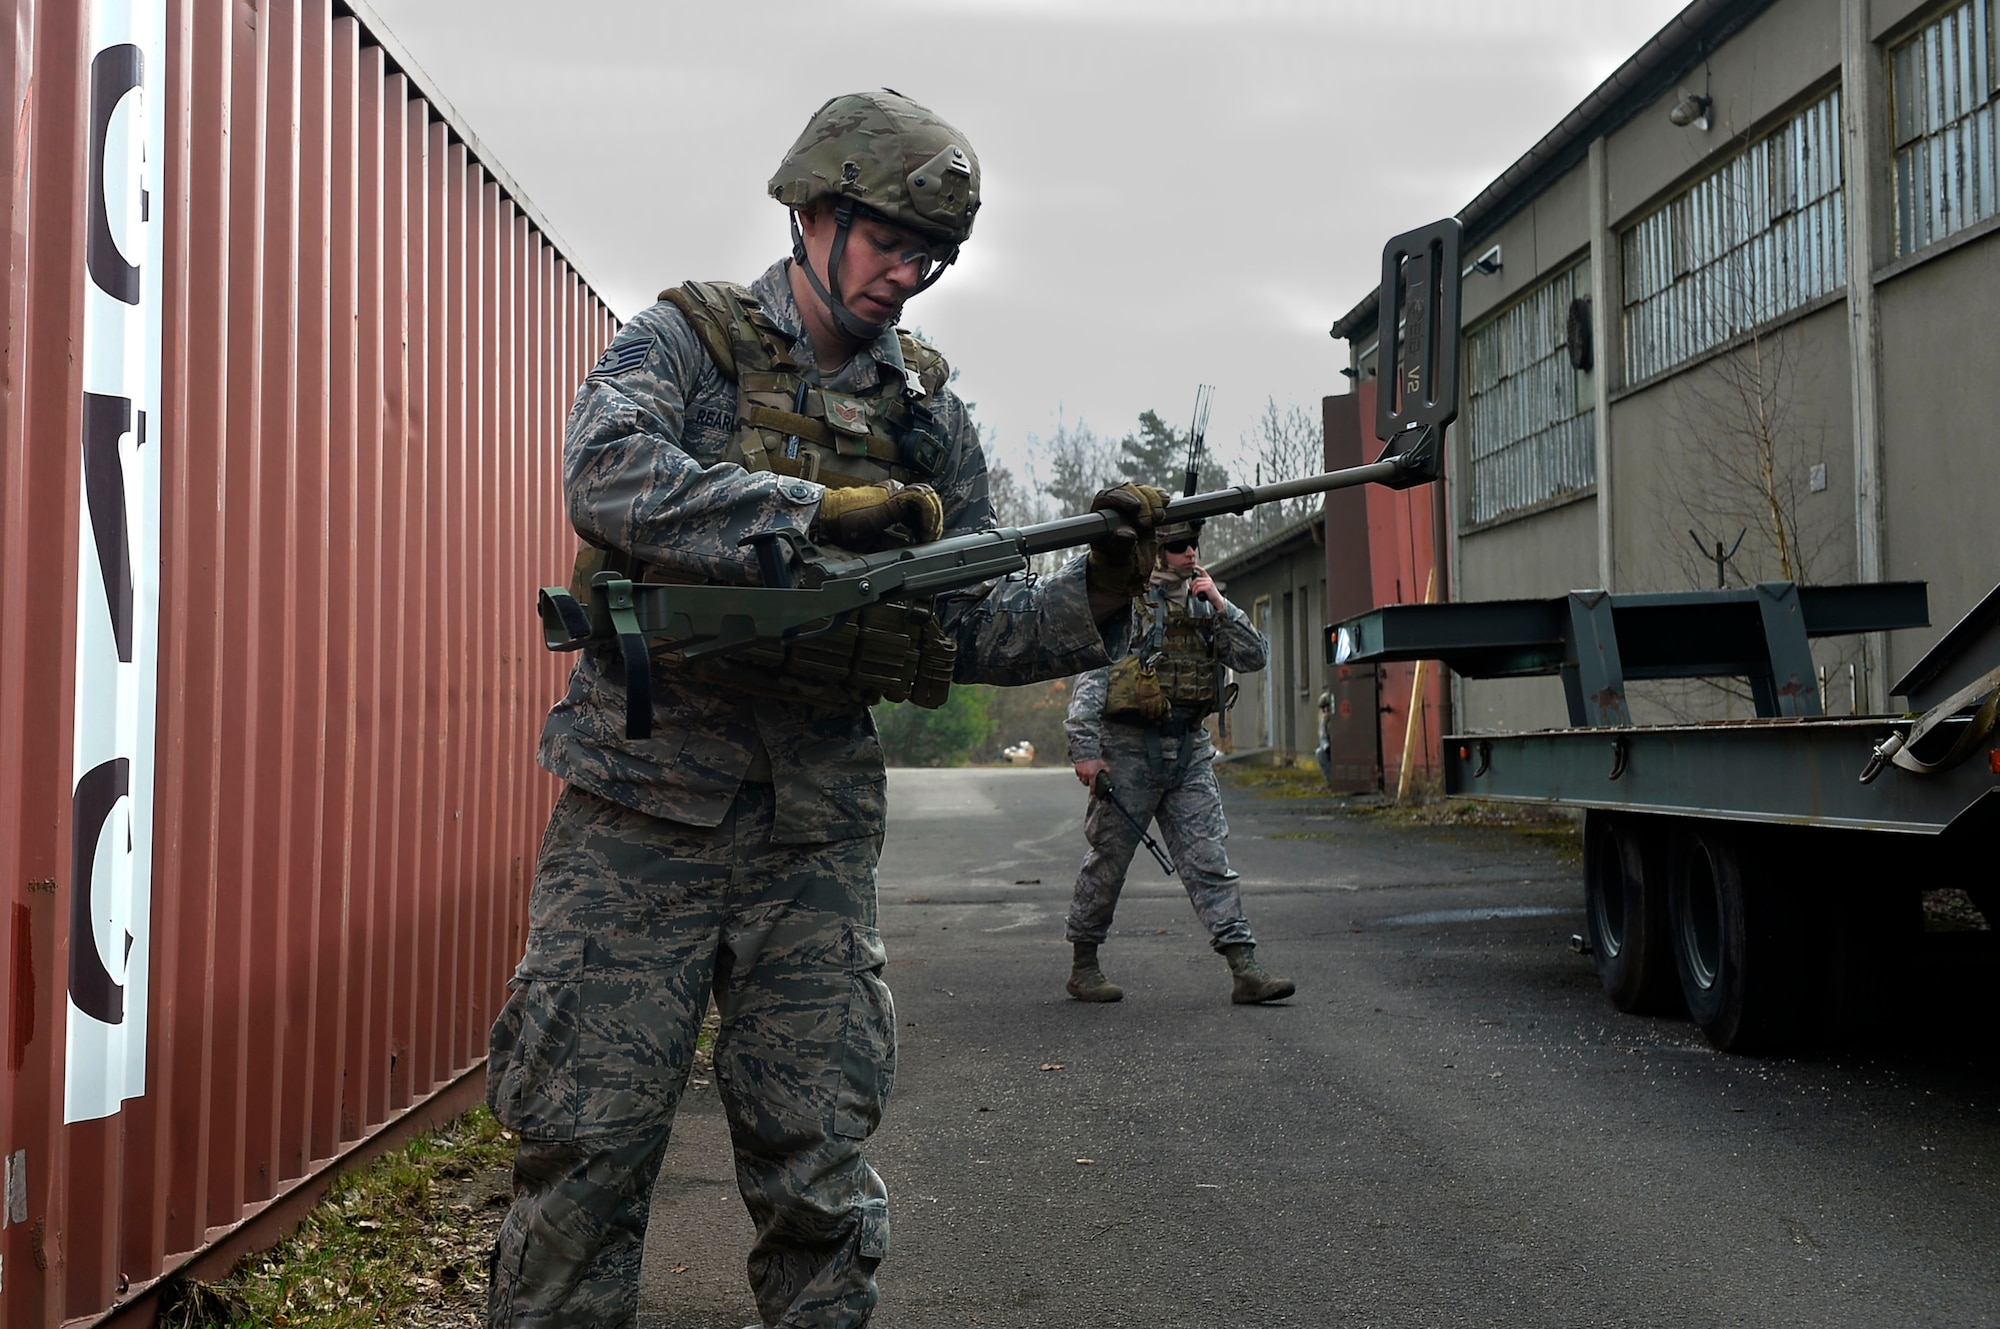 Staff Sgt. Sam Reardon, 52nd Civil Engineer Squadron explosive ordnance disposal craftsman, inspects his metal detector during an exercise on Ramstein Air Base, Germany, March 23, 2017. EOD Airmen use a variety of equipment when working in areas which potentially contain explosives. Exercise Silver Flag involved EOD Airmen from different U.S. air bases around Germany. (U.S. Air Force photo by Airman 1st Class Joshua Magbanua) 